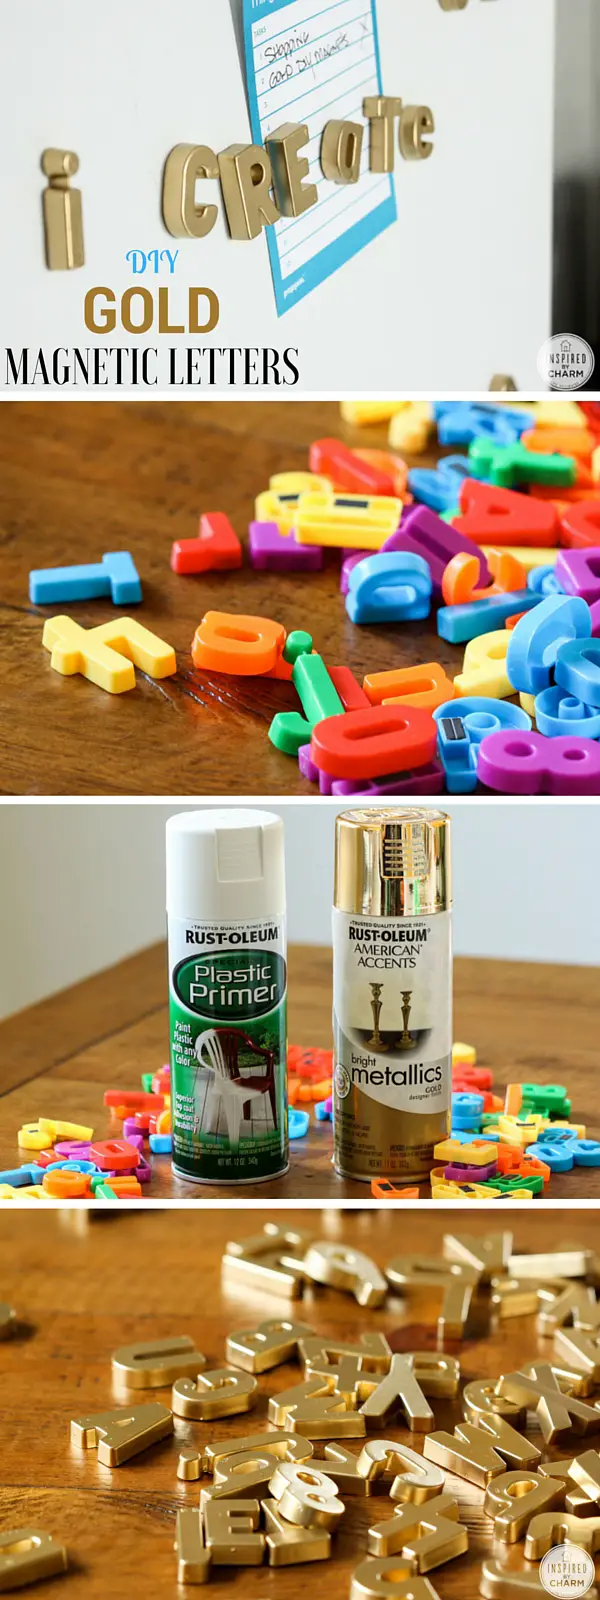 Check out the tutorial: #DIY Gold Magnetic Letters @istandarddesign